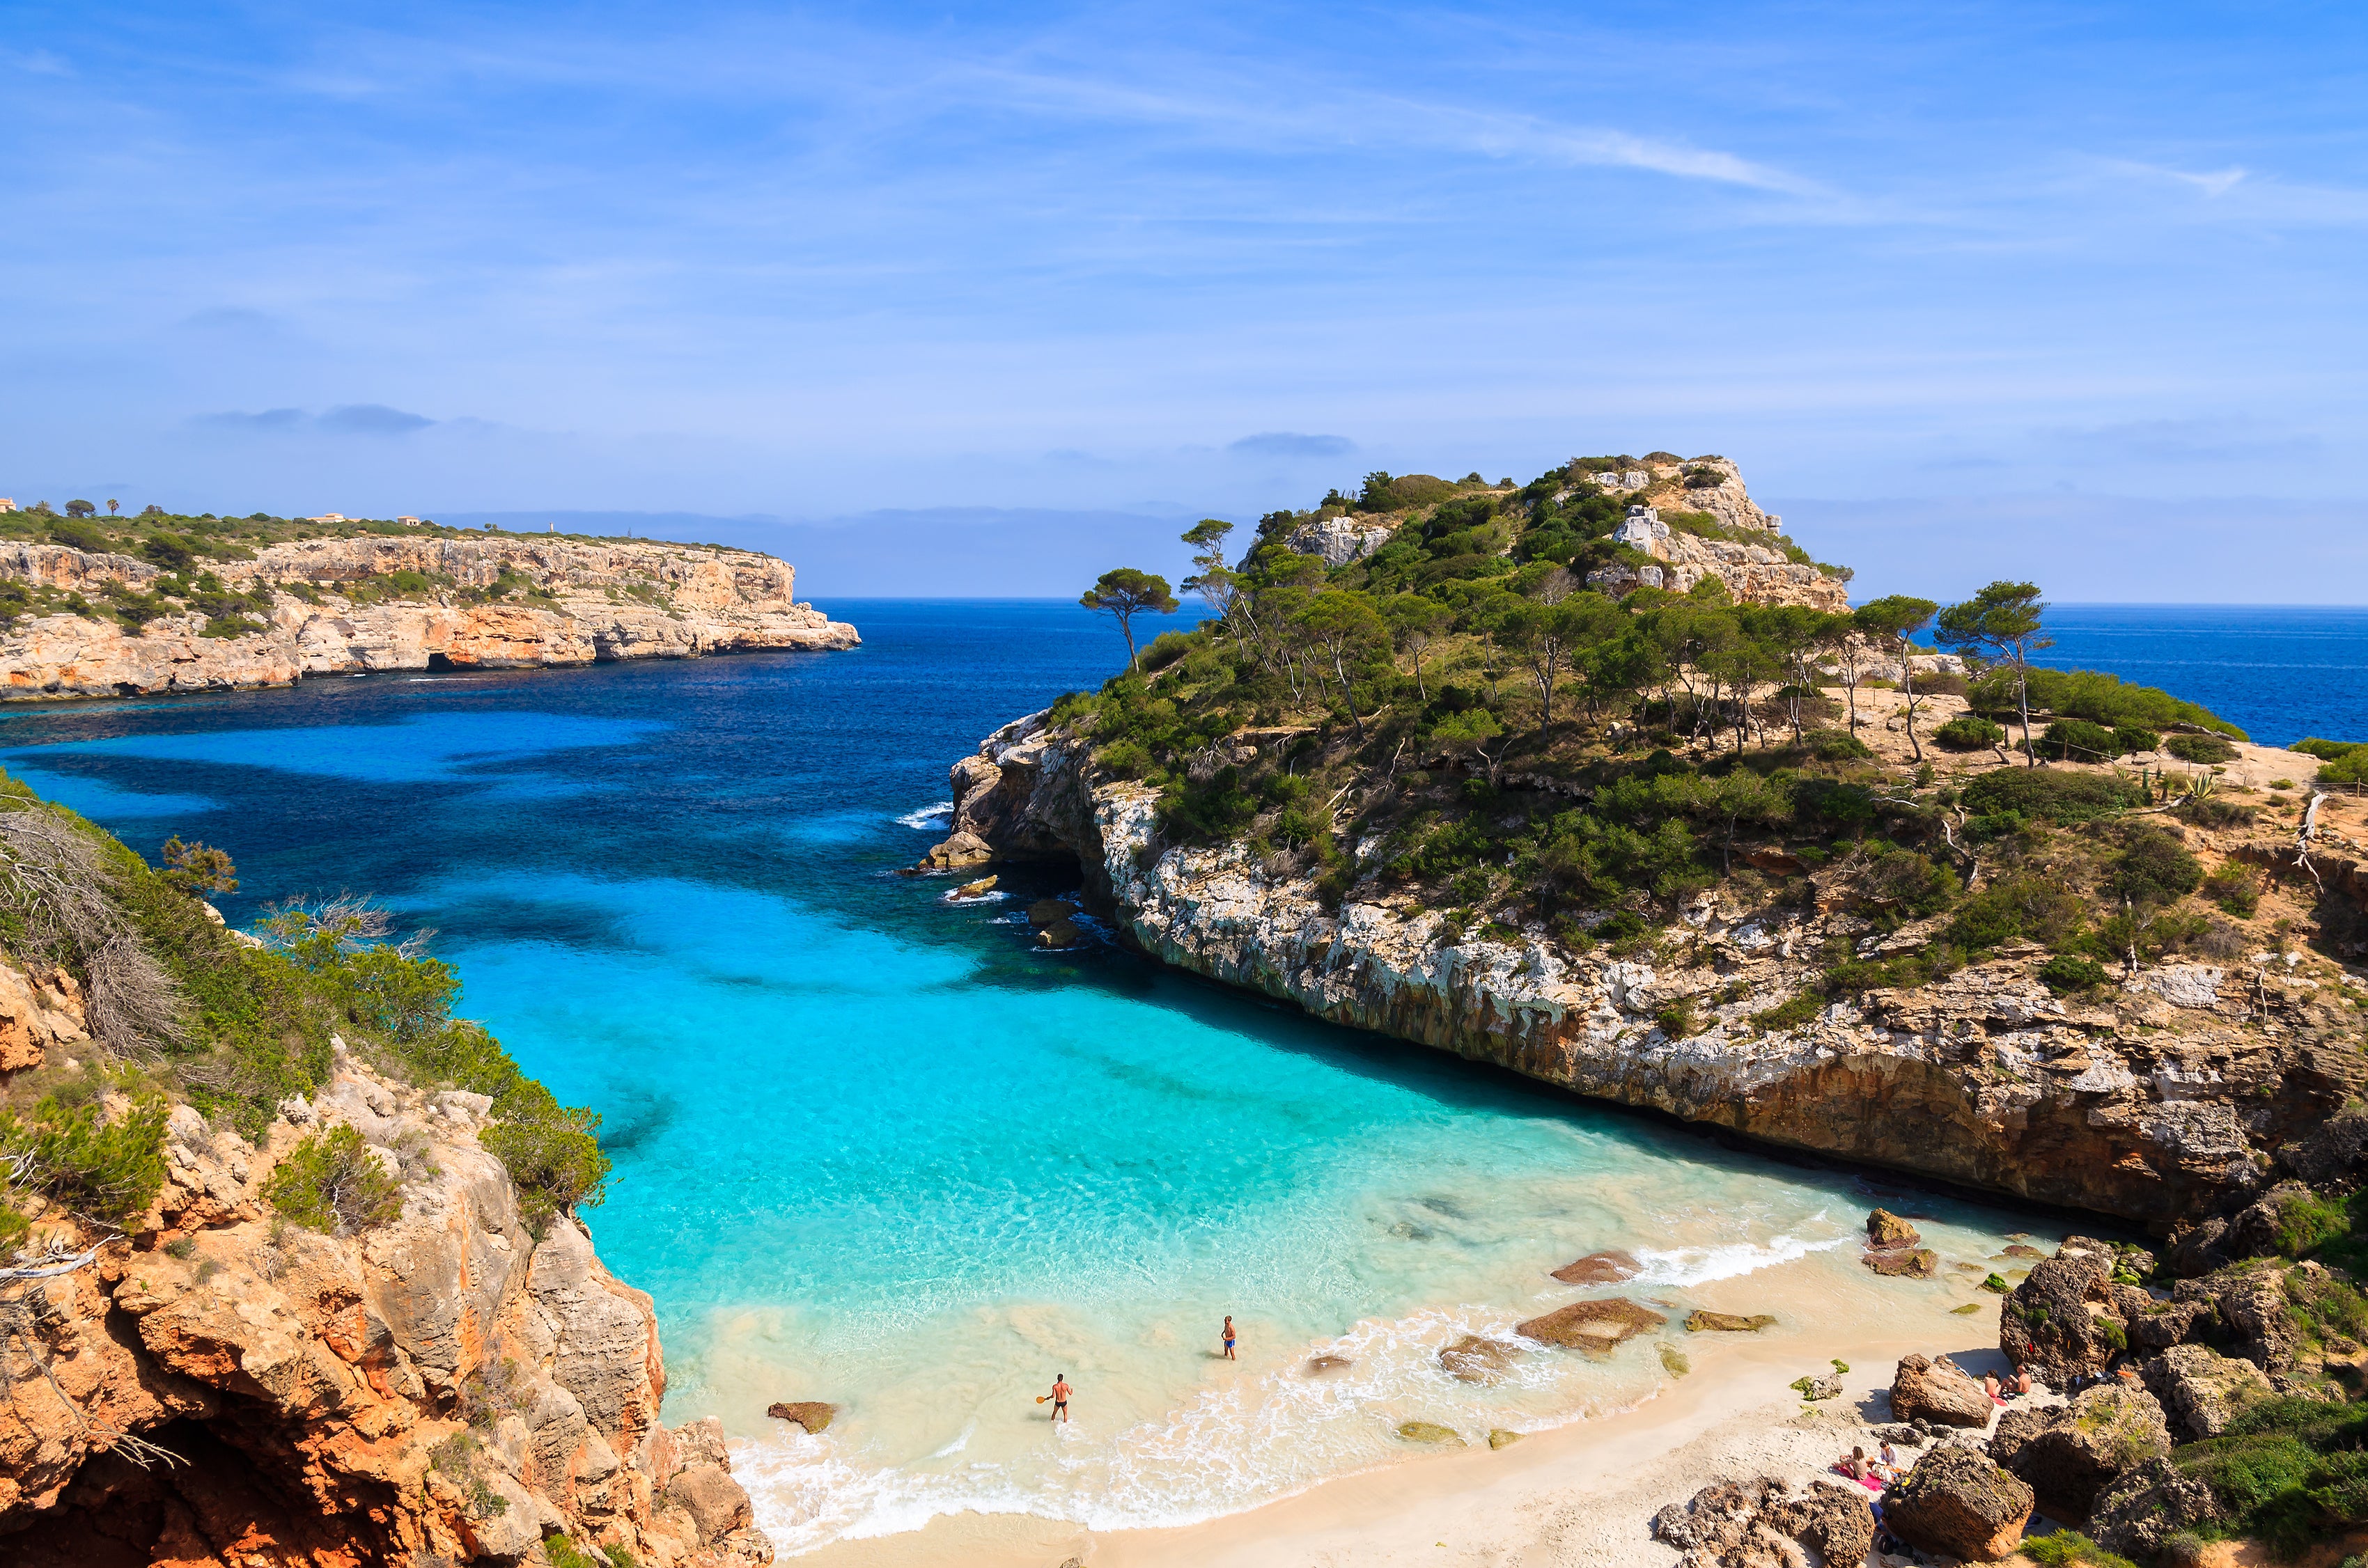 Calo des Moro in Mallorca is among the beaches where smoking is banned